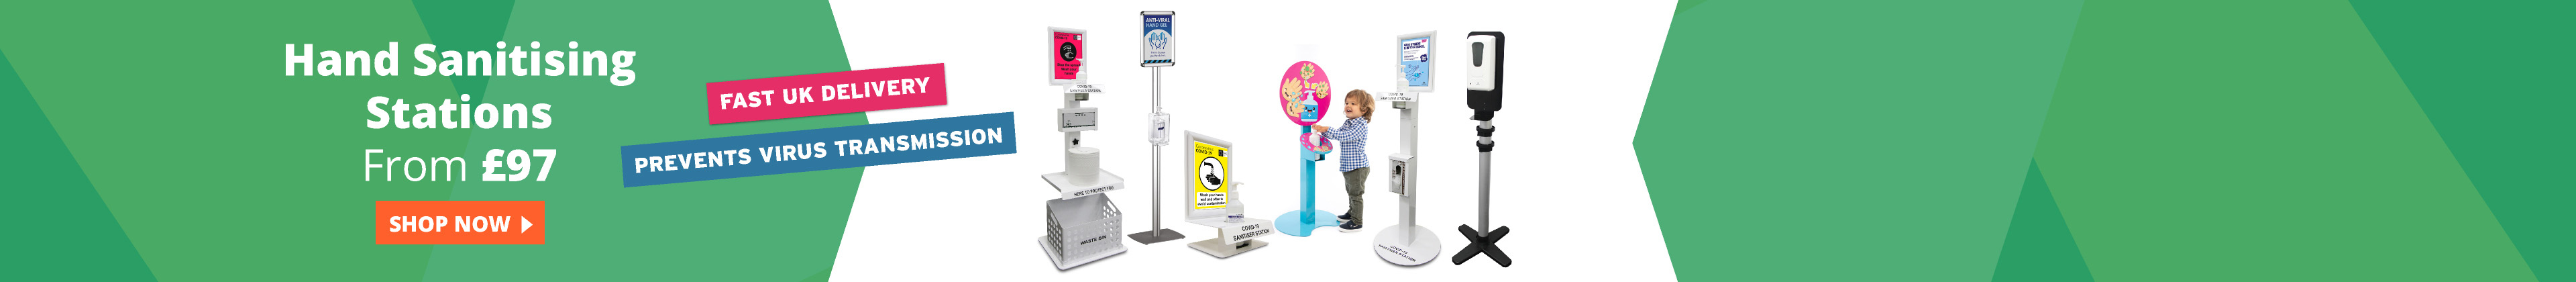 https://www.xldisplays.co.uk/categories/covid19-social-distancing-signs-and-displays/hand-sanitiser-stations/